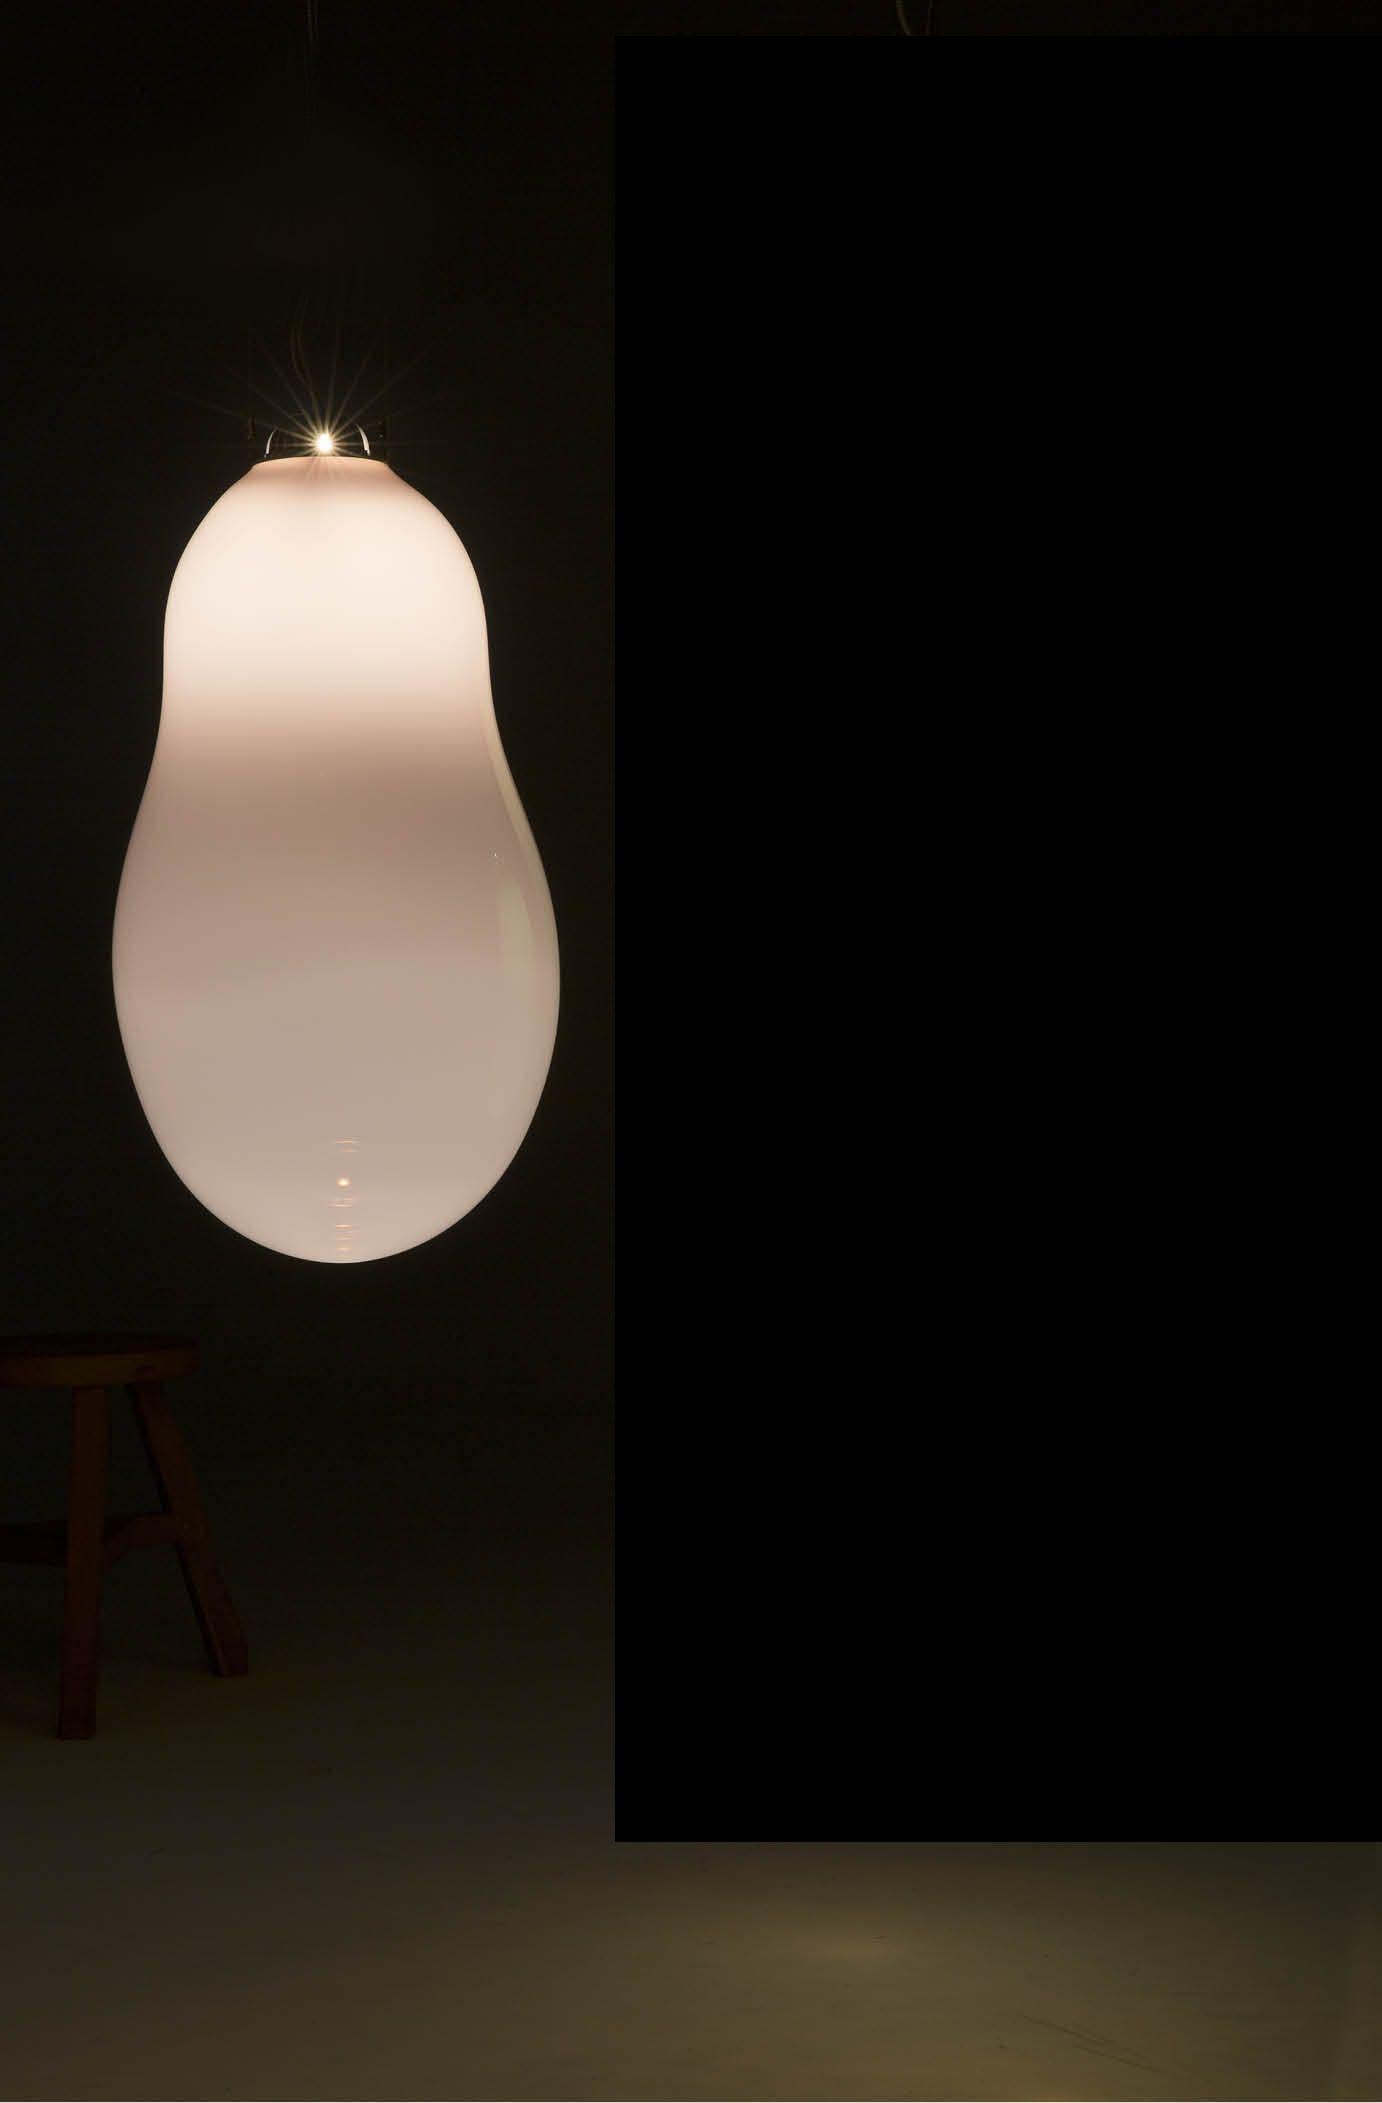 Big bubble pendant light by Alex de Witte;
It can be purchased as an ensemble or individual, in different dimensions and colors.

Dimensions: 
Extra large 100-120 cm 8-12 kg
Large 80-100 cm 7-12 kg
Medium 60-80 cm 4-8 kg
Small 45-60 cm 2-5